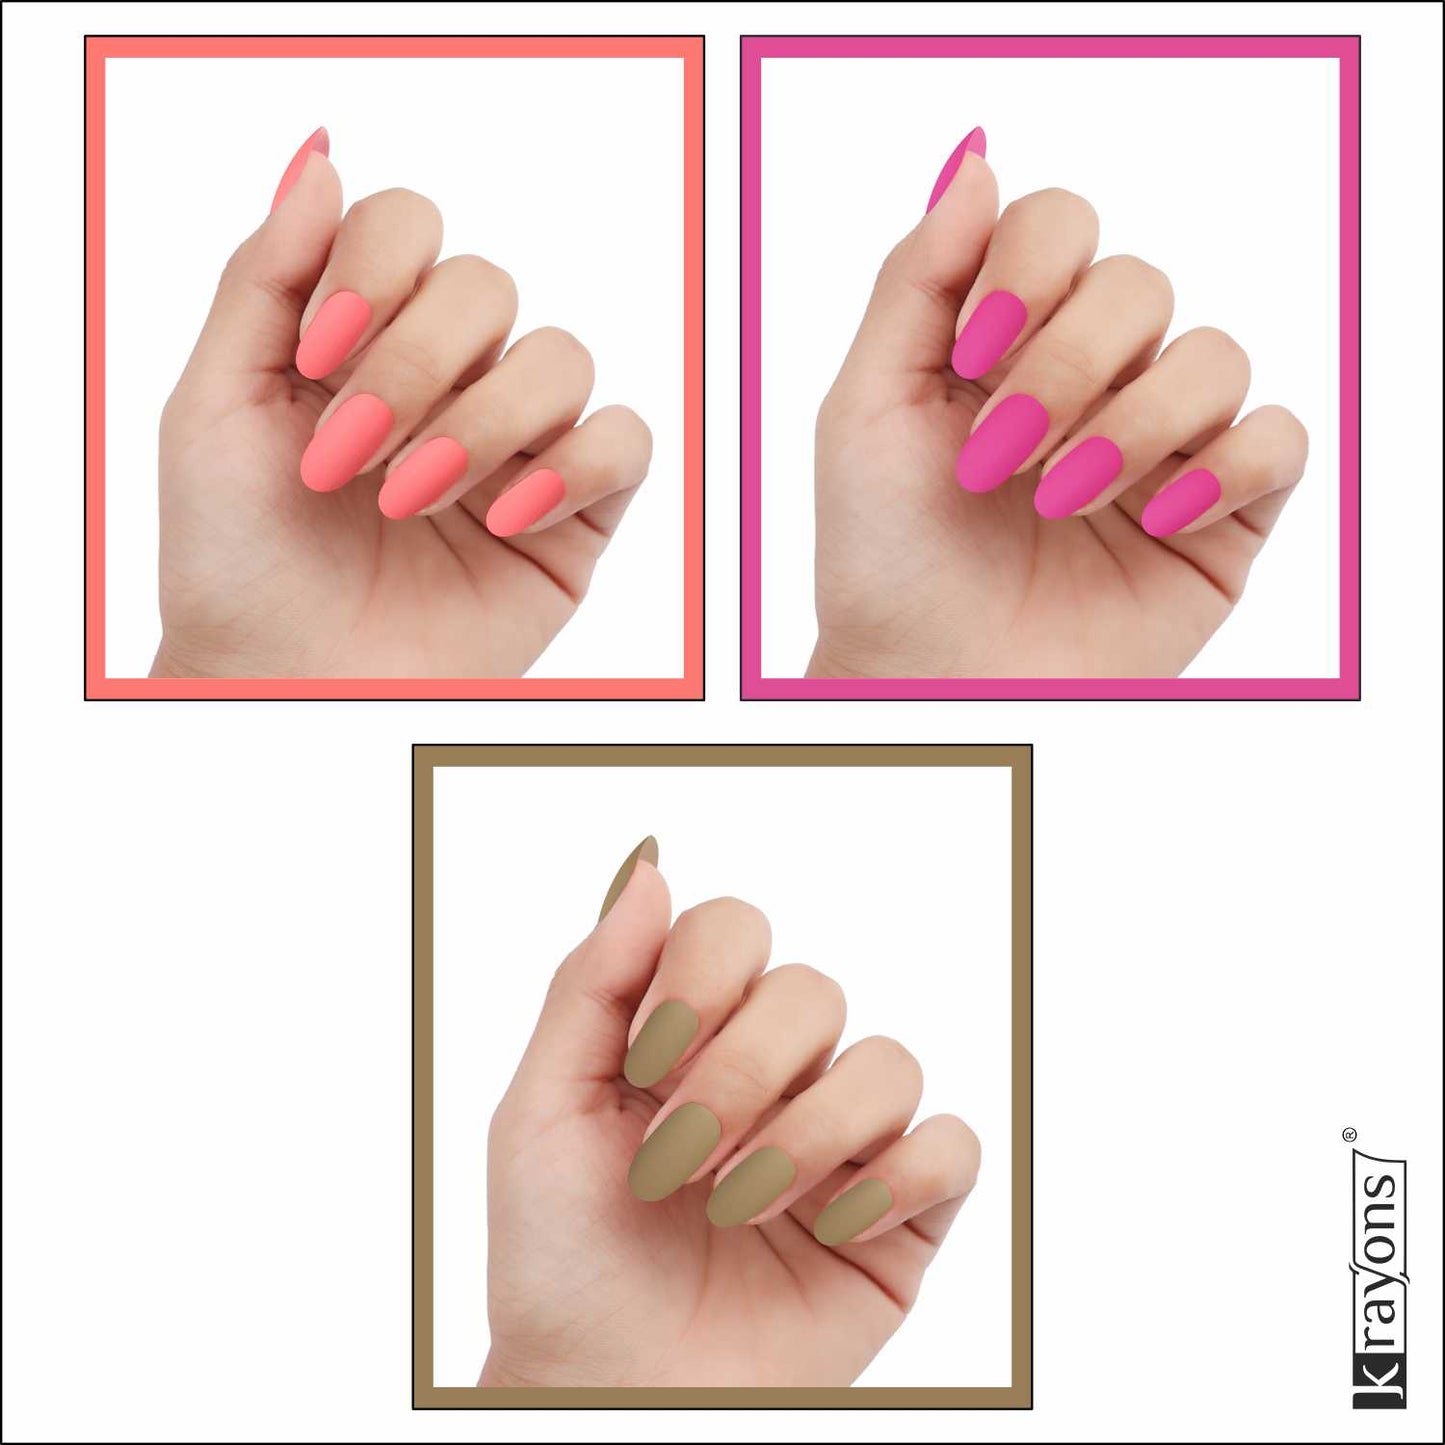 Krayons Cute Super Matte Finish Nail Enamel, Quick Dry, LongLasting, Blossom Peach, Hot Pink, Nude Beige, 6ml Each (Pack of 3)